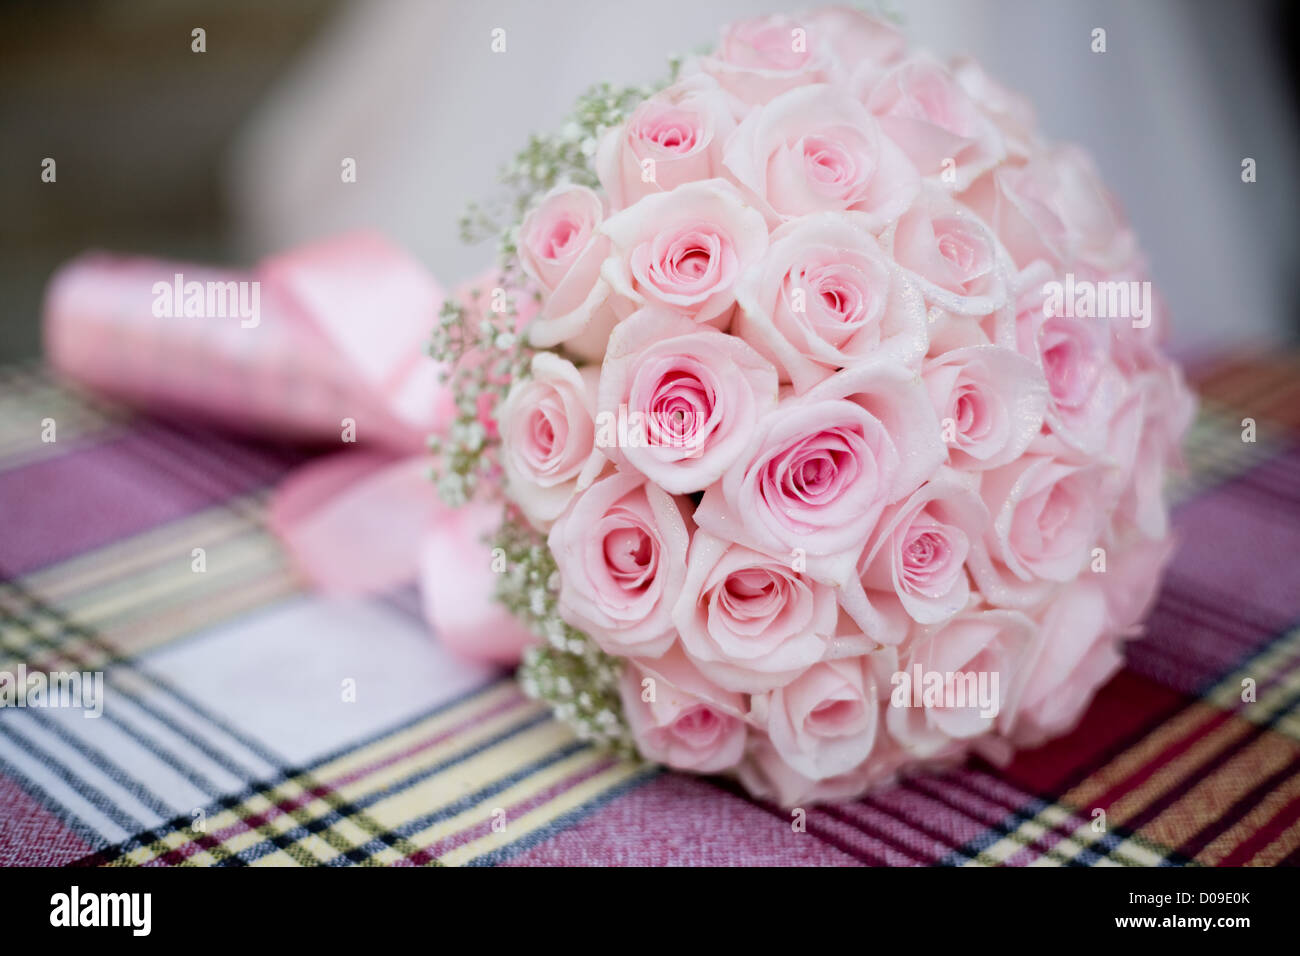 Wedding bouquet with pink roses on checkered backgdrop Stock Photo